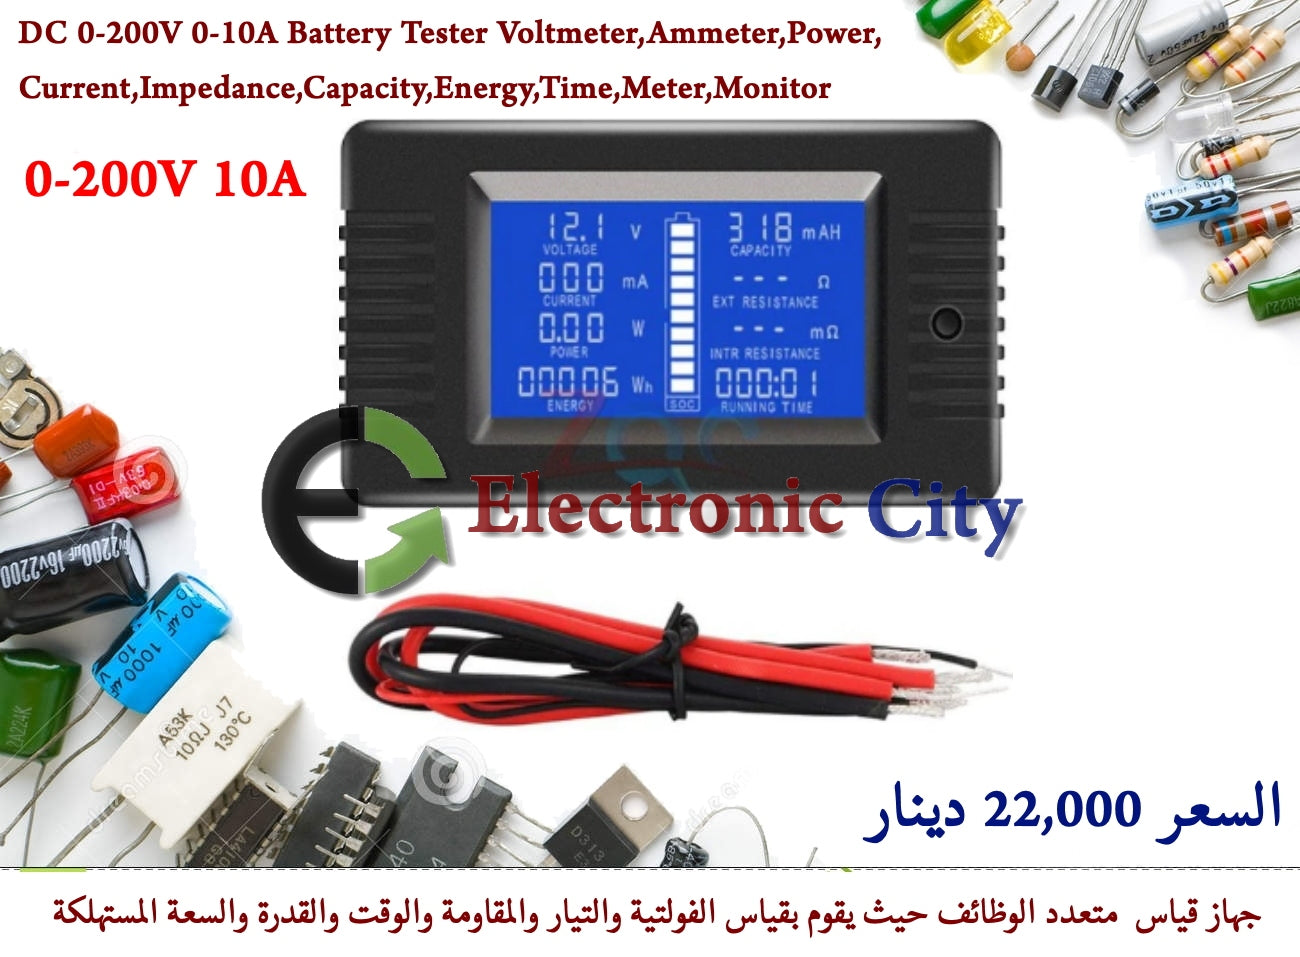 DC 0-200V 0-10A Battery Tester Voltmeter,Ammeter,Power,Current,Impedance,Capacity,Energy,Time,Meter,Monitor #E7 X30640